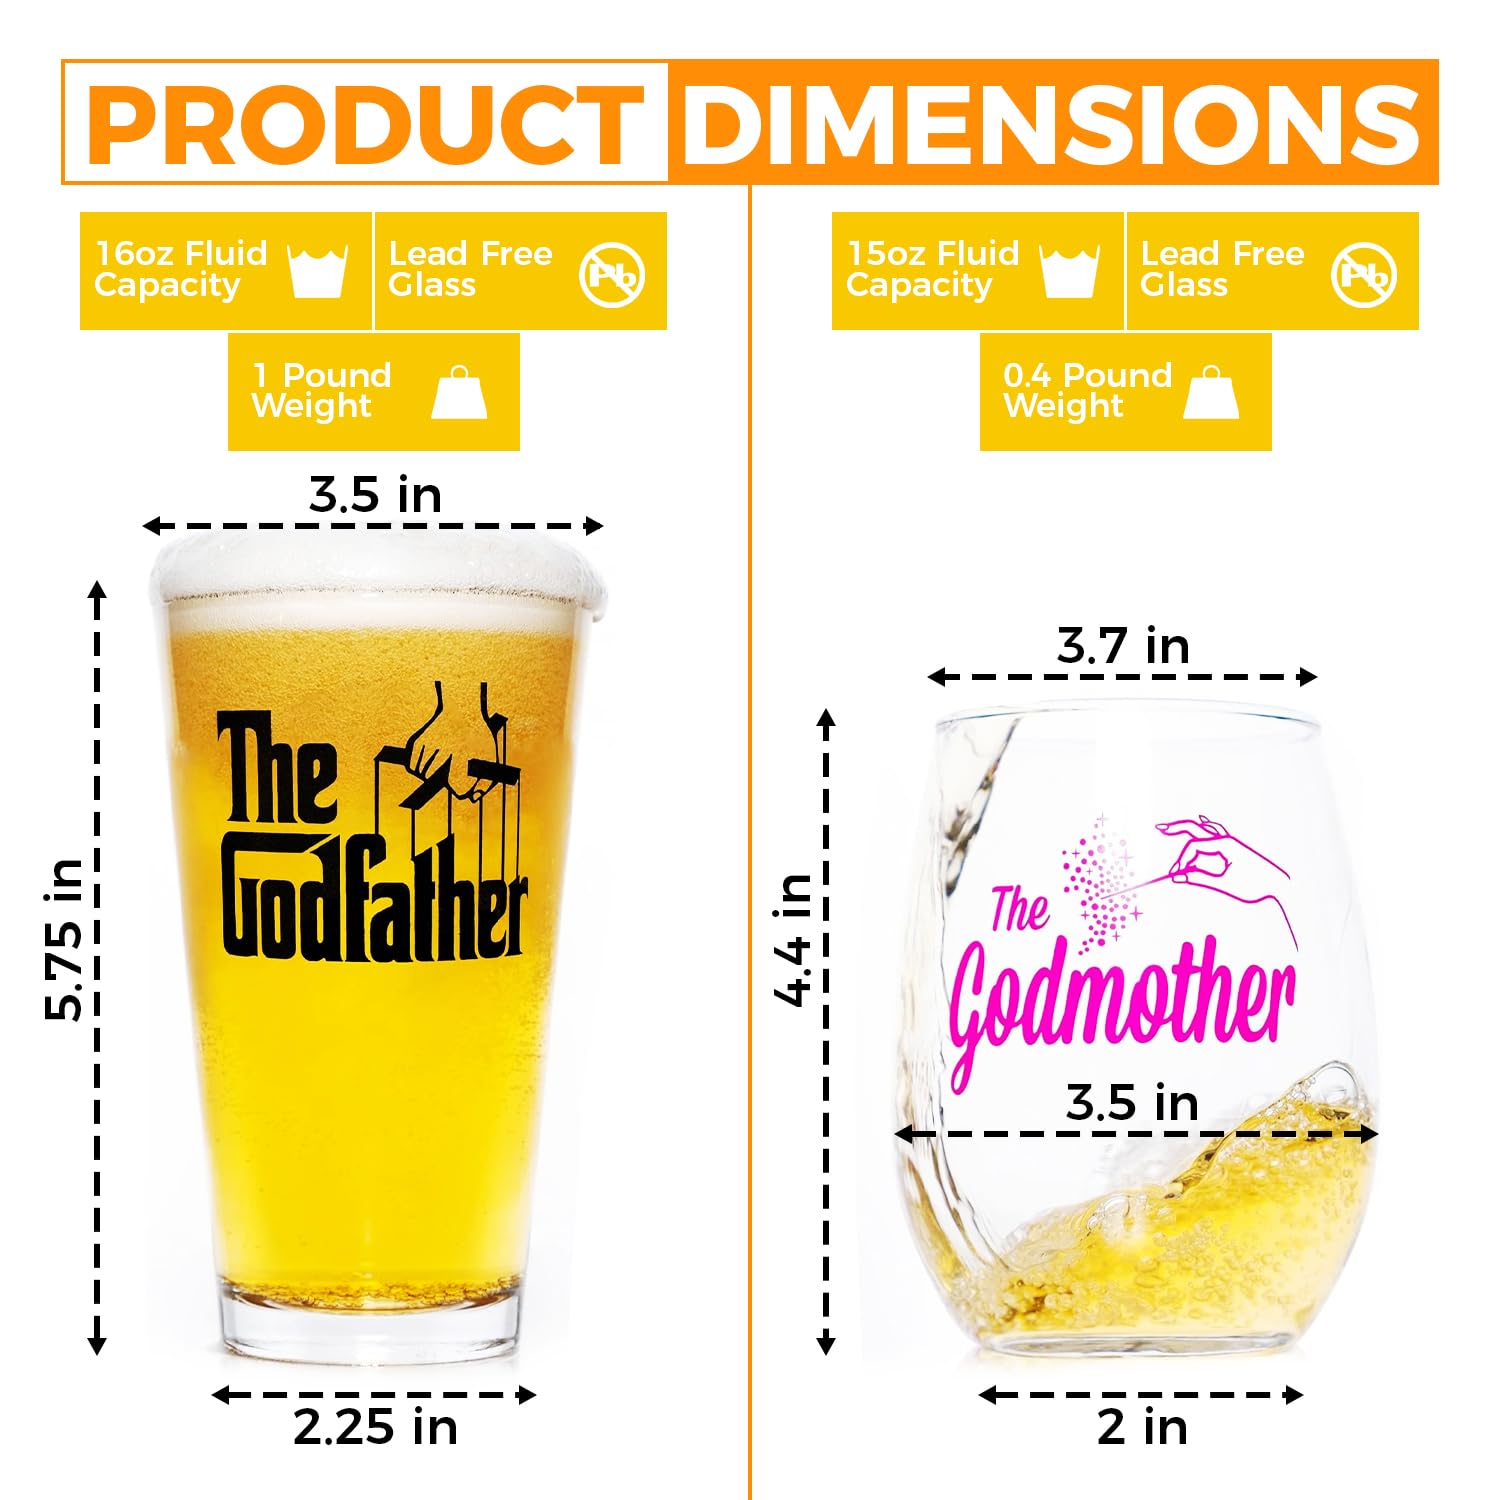 The Godfather & The Godmother Printed Pint & Stemless Wine Glass Set - Officially Licensed, Premium Quality, Handcrafted Glassware - A Collectible Gift for Godparents, Movie Lovers & Special Occasions